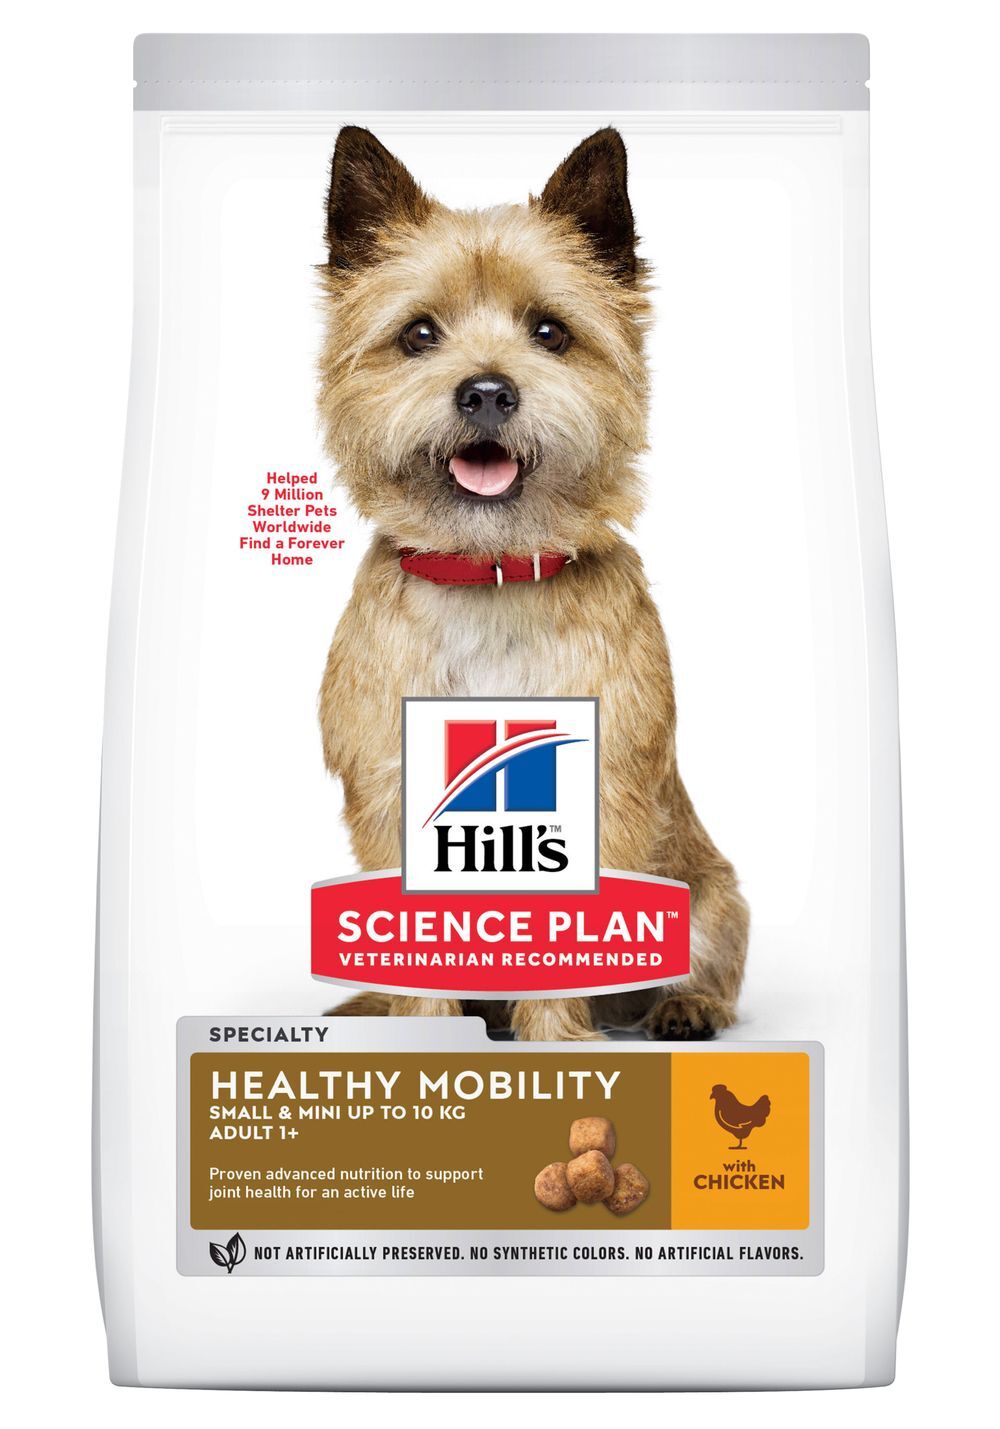 Hill's Science Plan 6kg Adult 1+ Healthy Mobility Small & Mini mit Huhn Hundefutter trocken